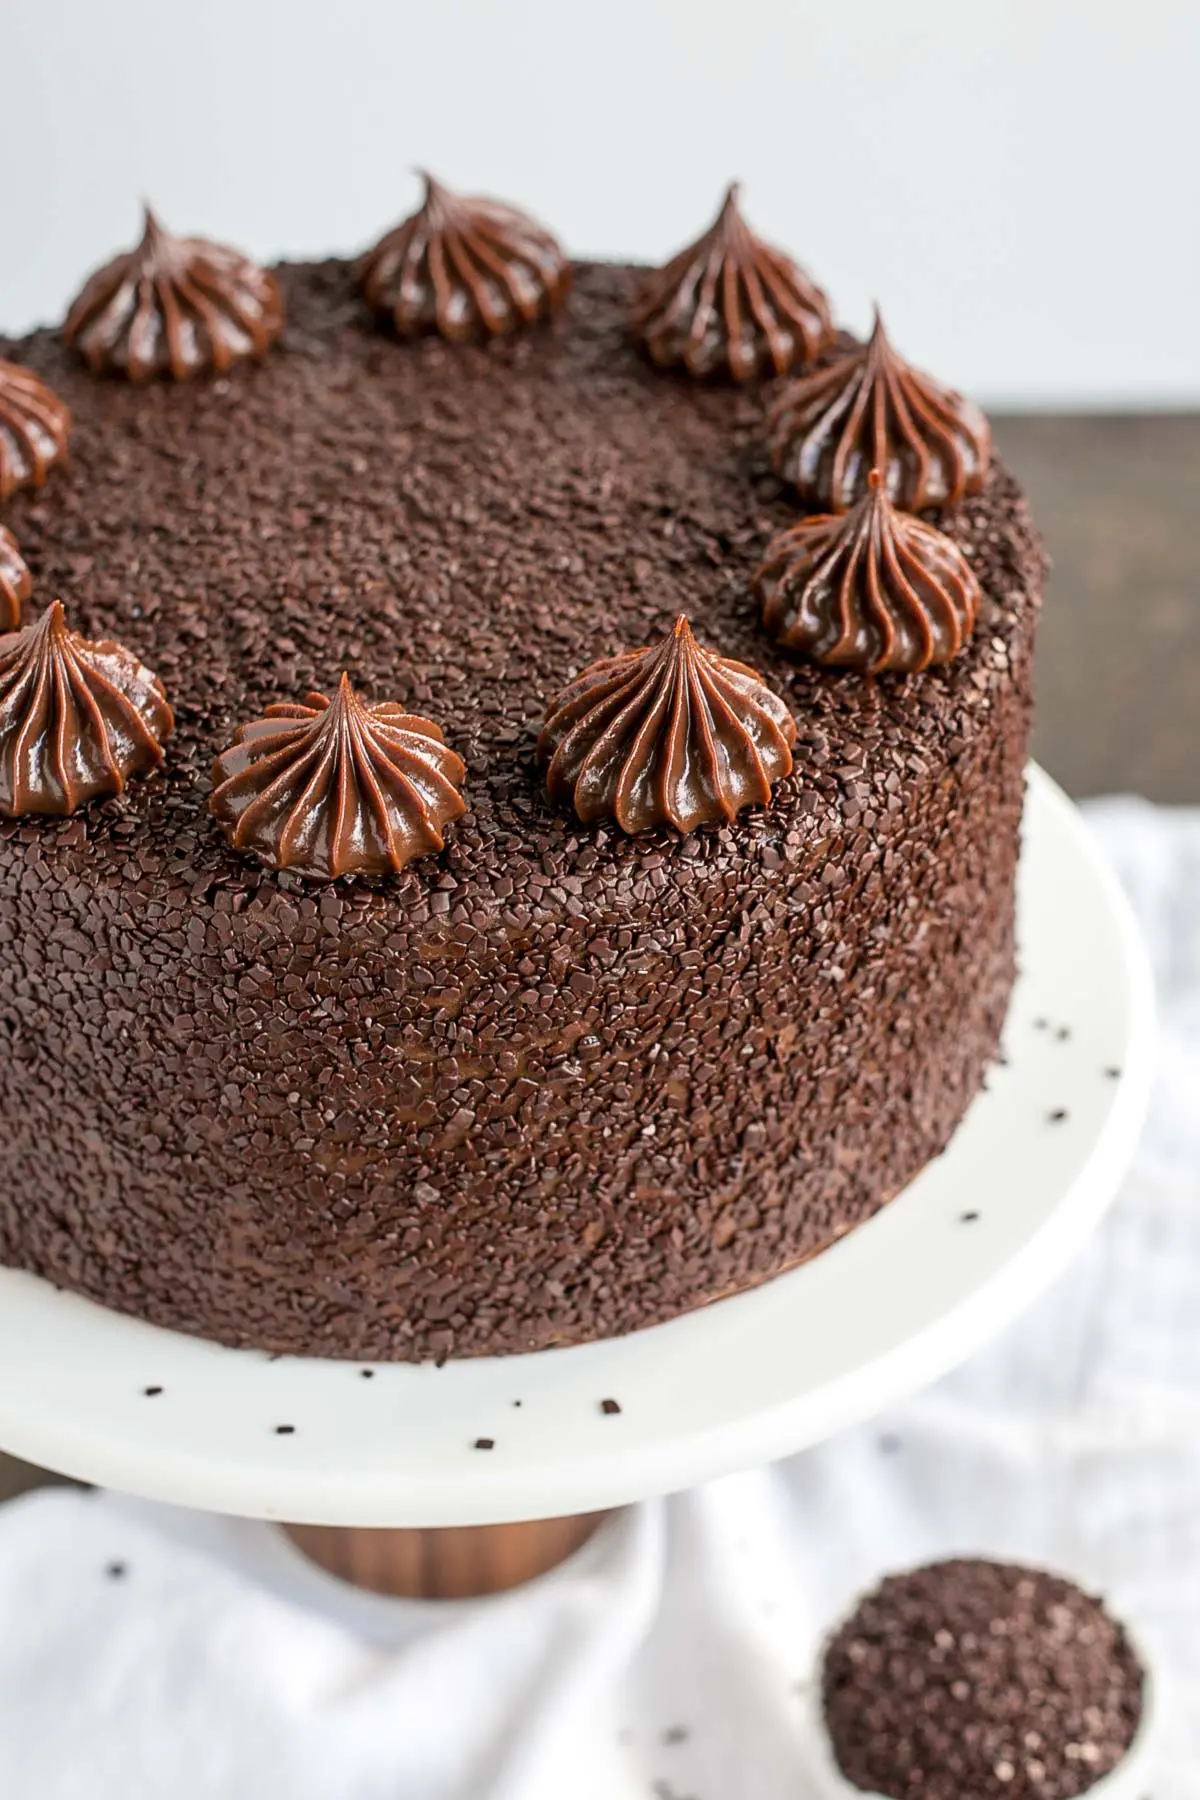 Chocolate truffle cake using ganache as a filling and frosting.